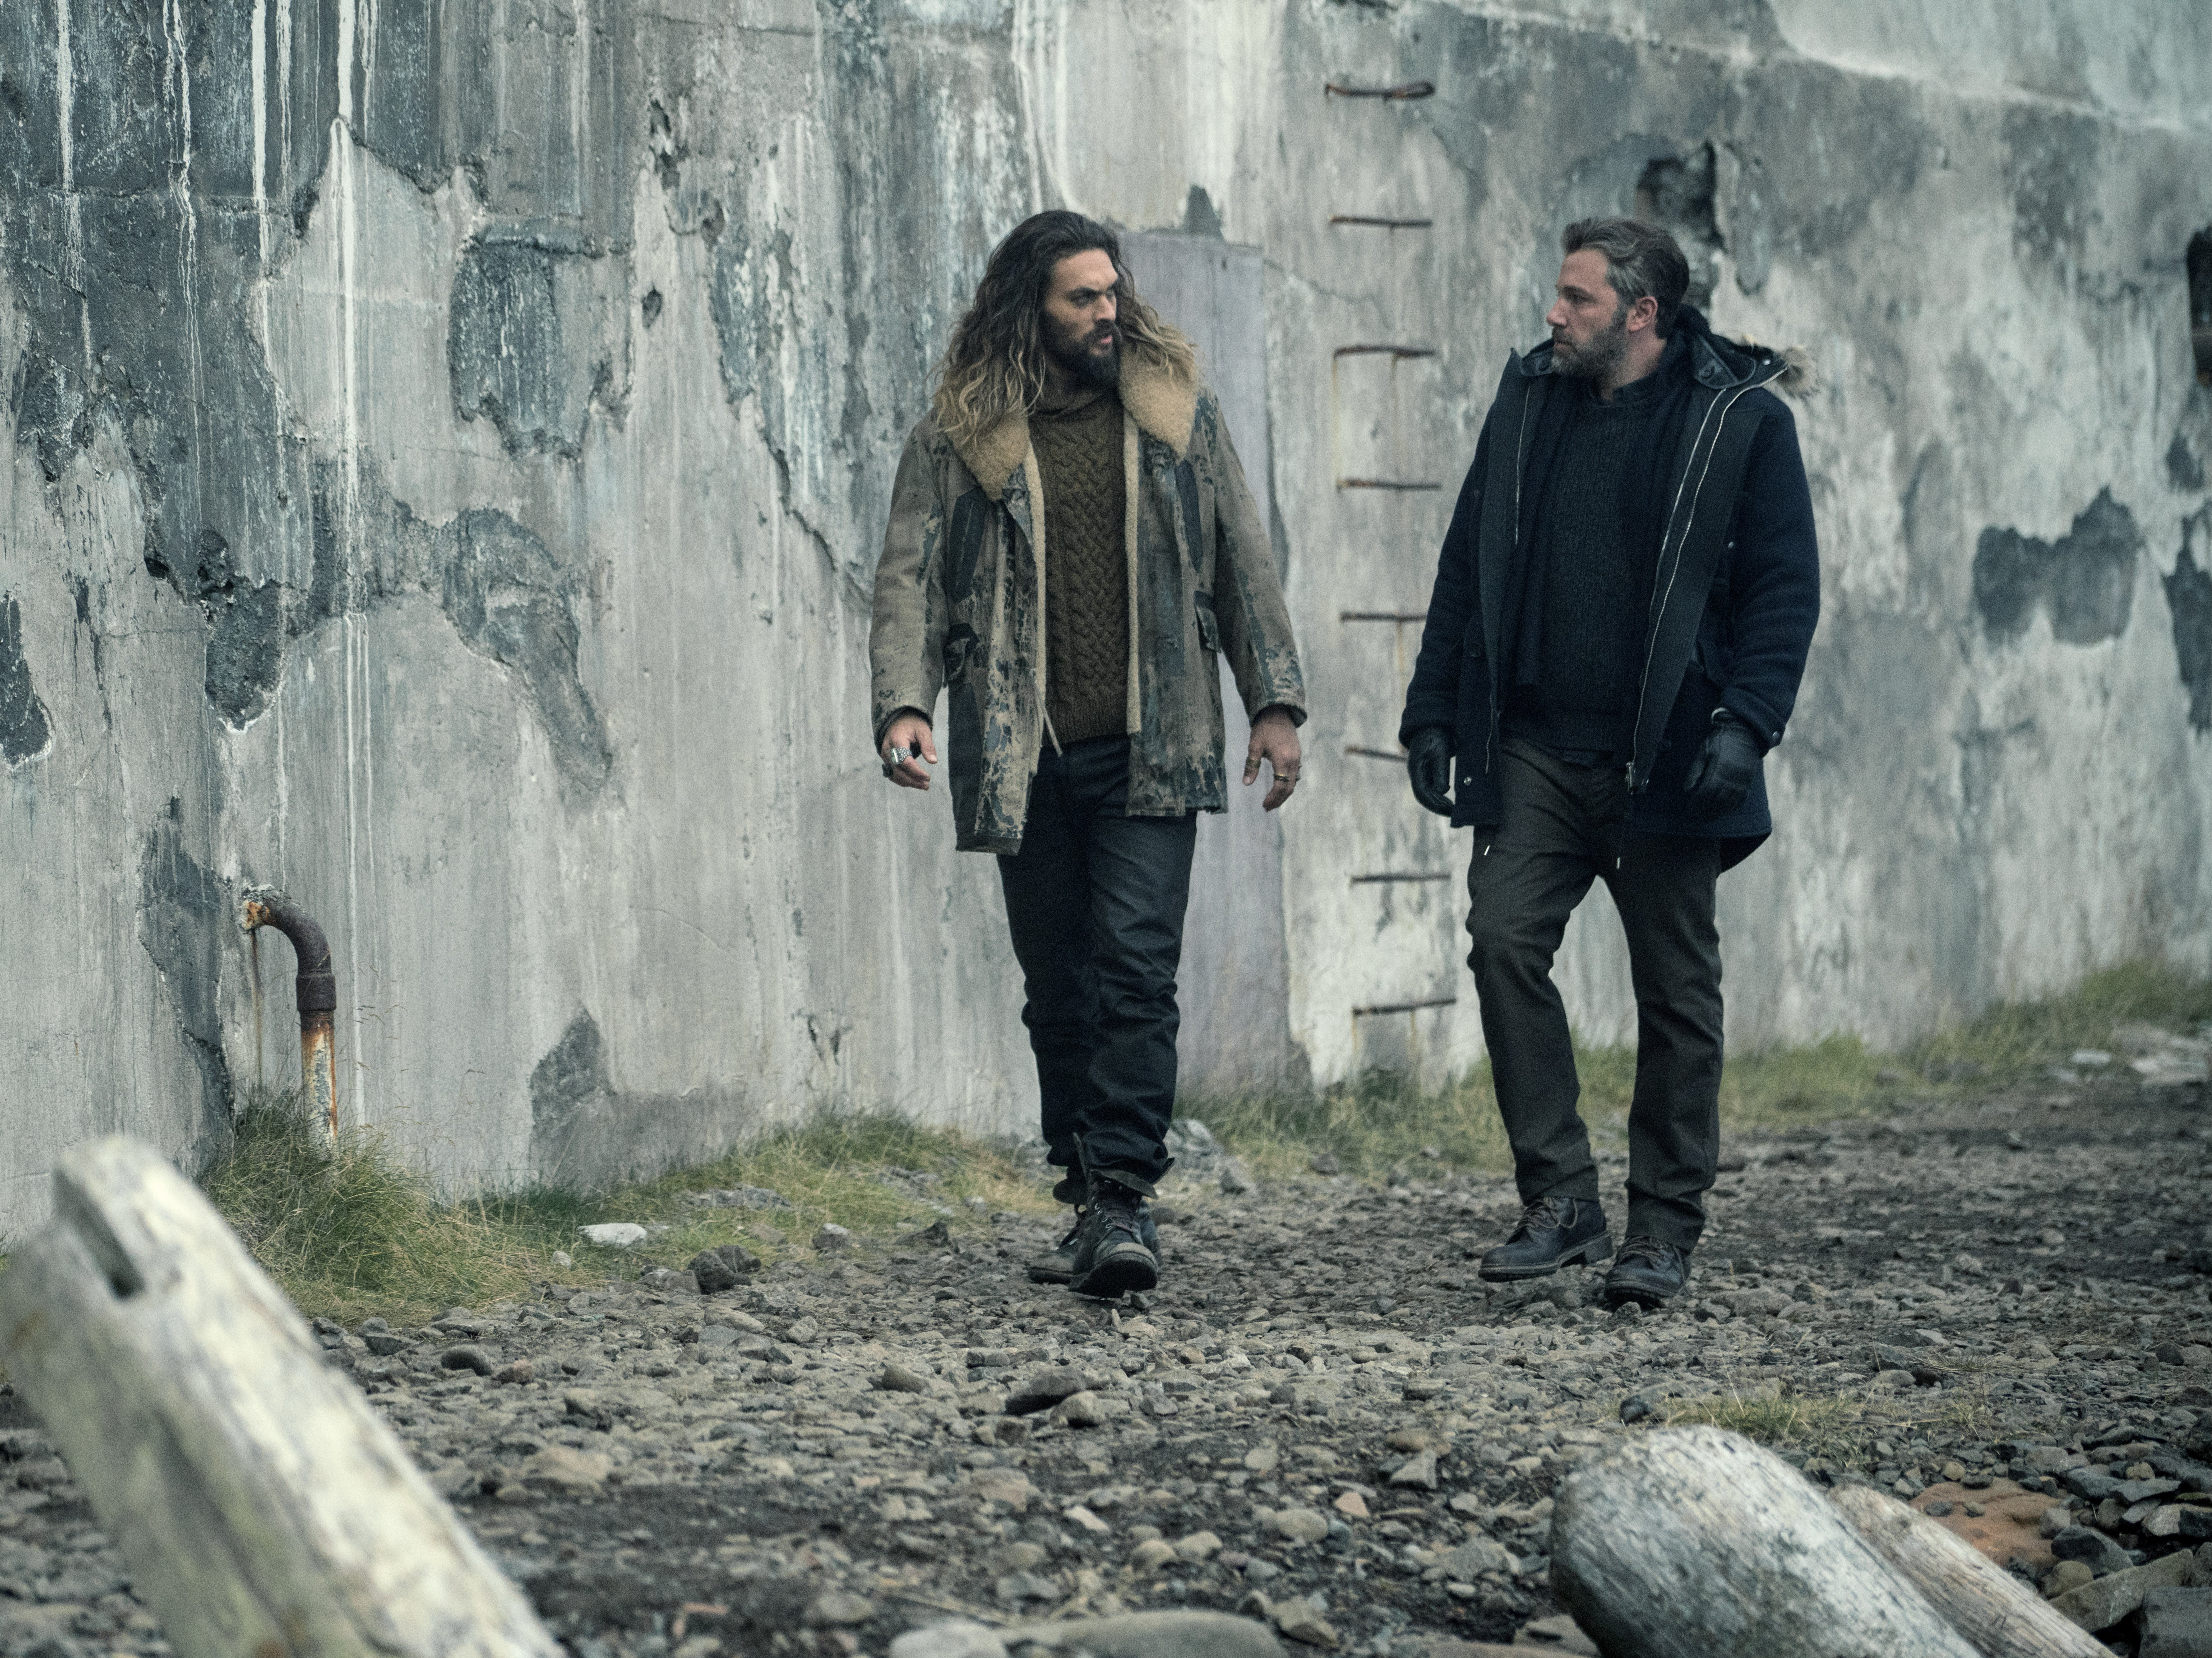 Jason Mamoa and Ben Affleck as Aquaman and Batman in Zack Snyder’s Justice League